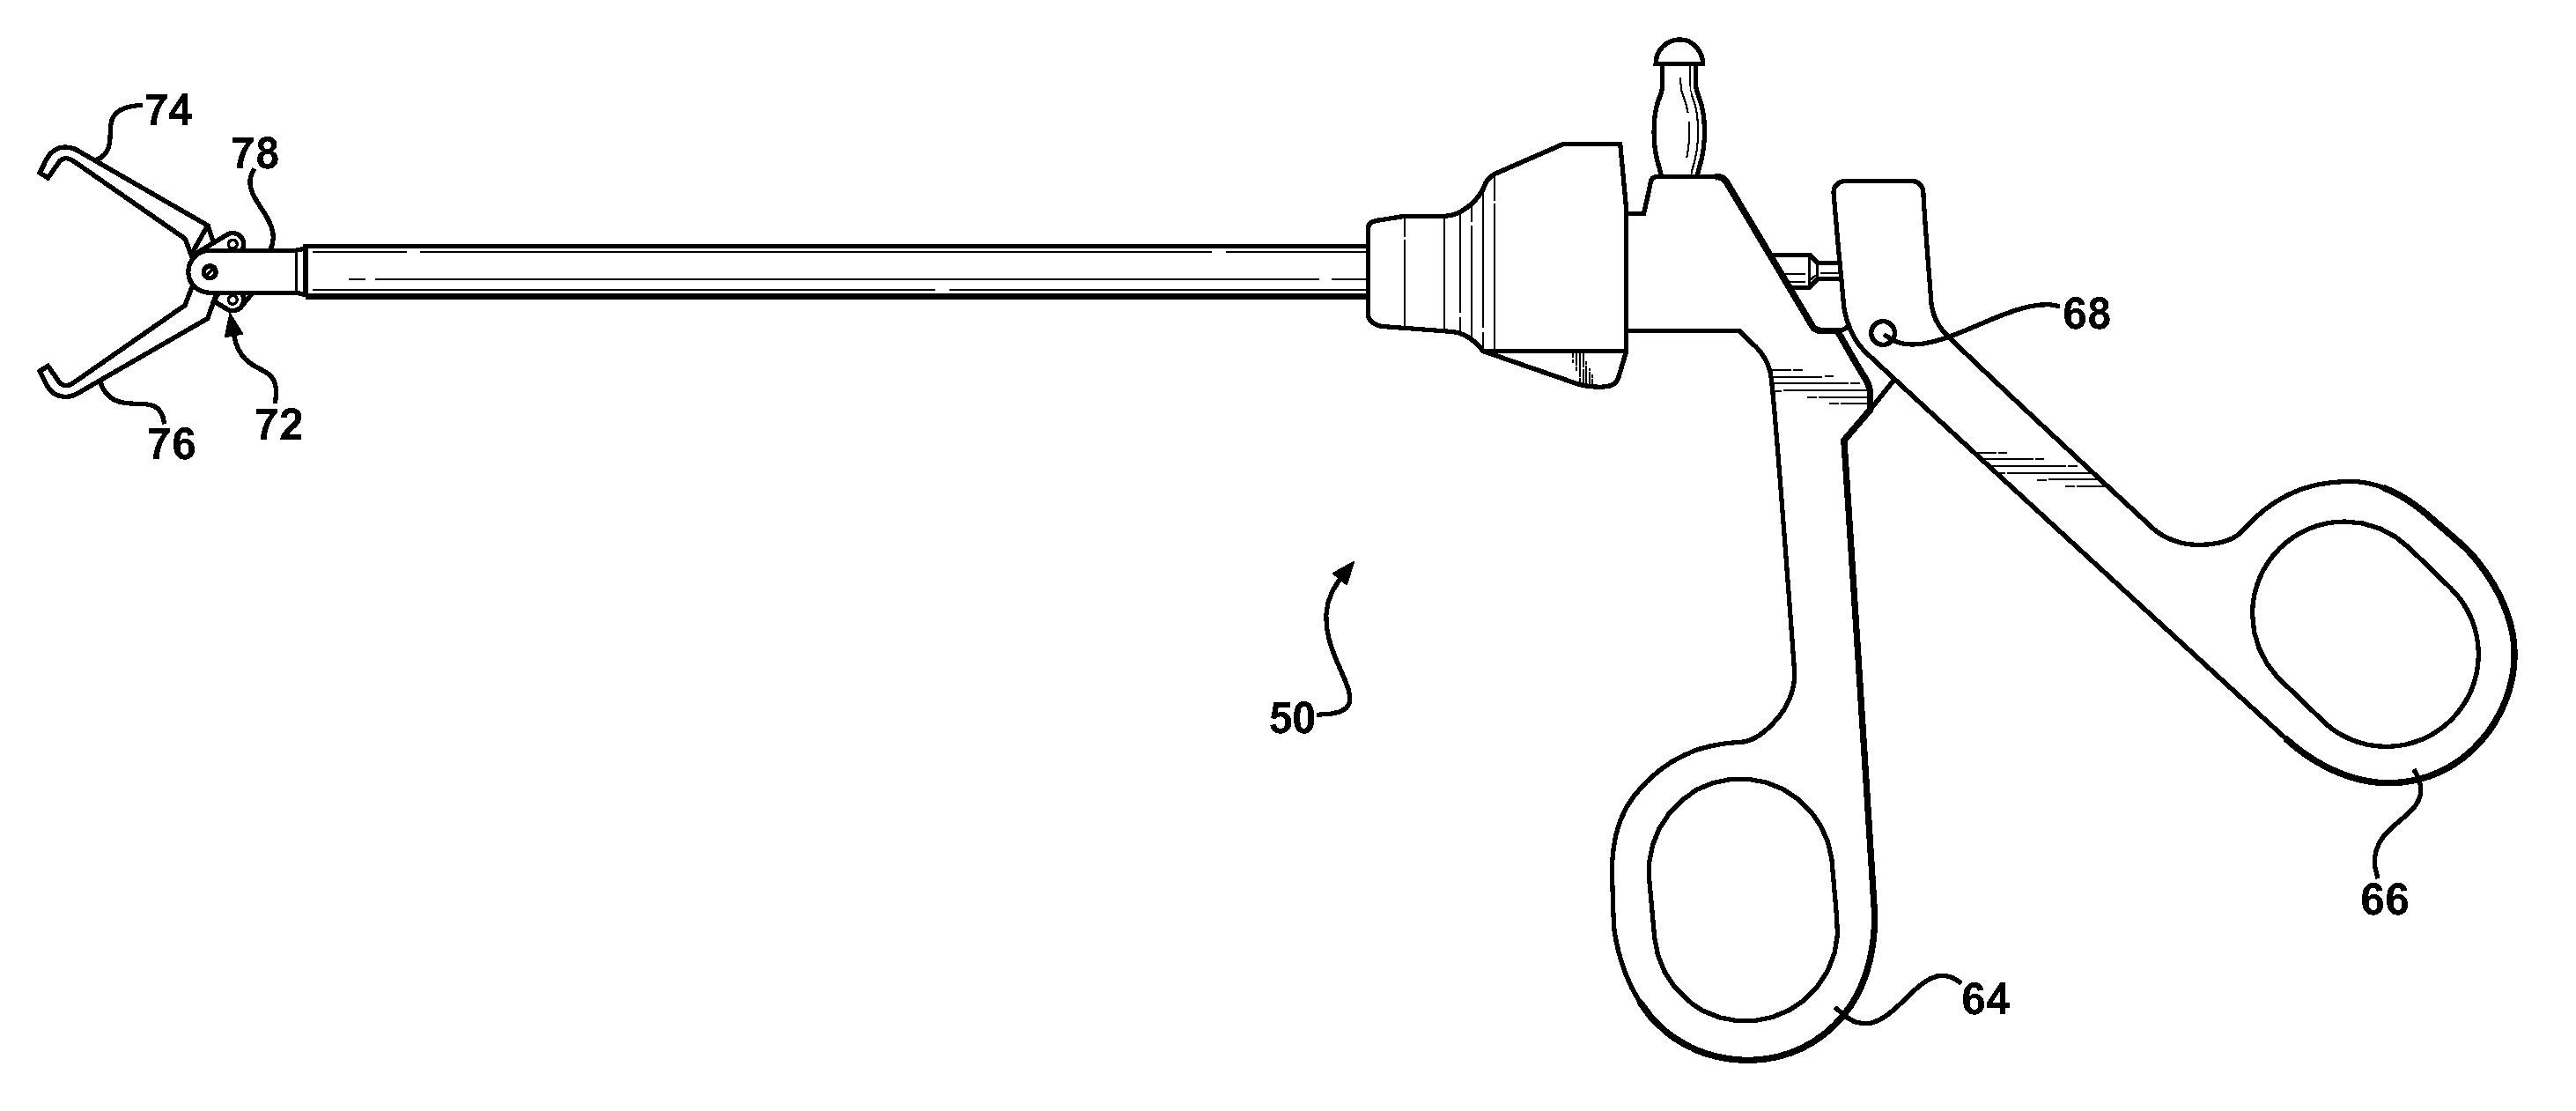 Surgical instrument with detachable tool assembly